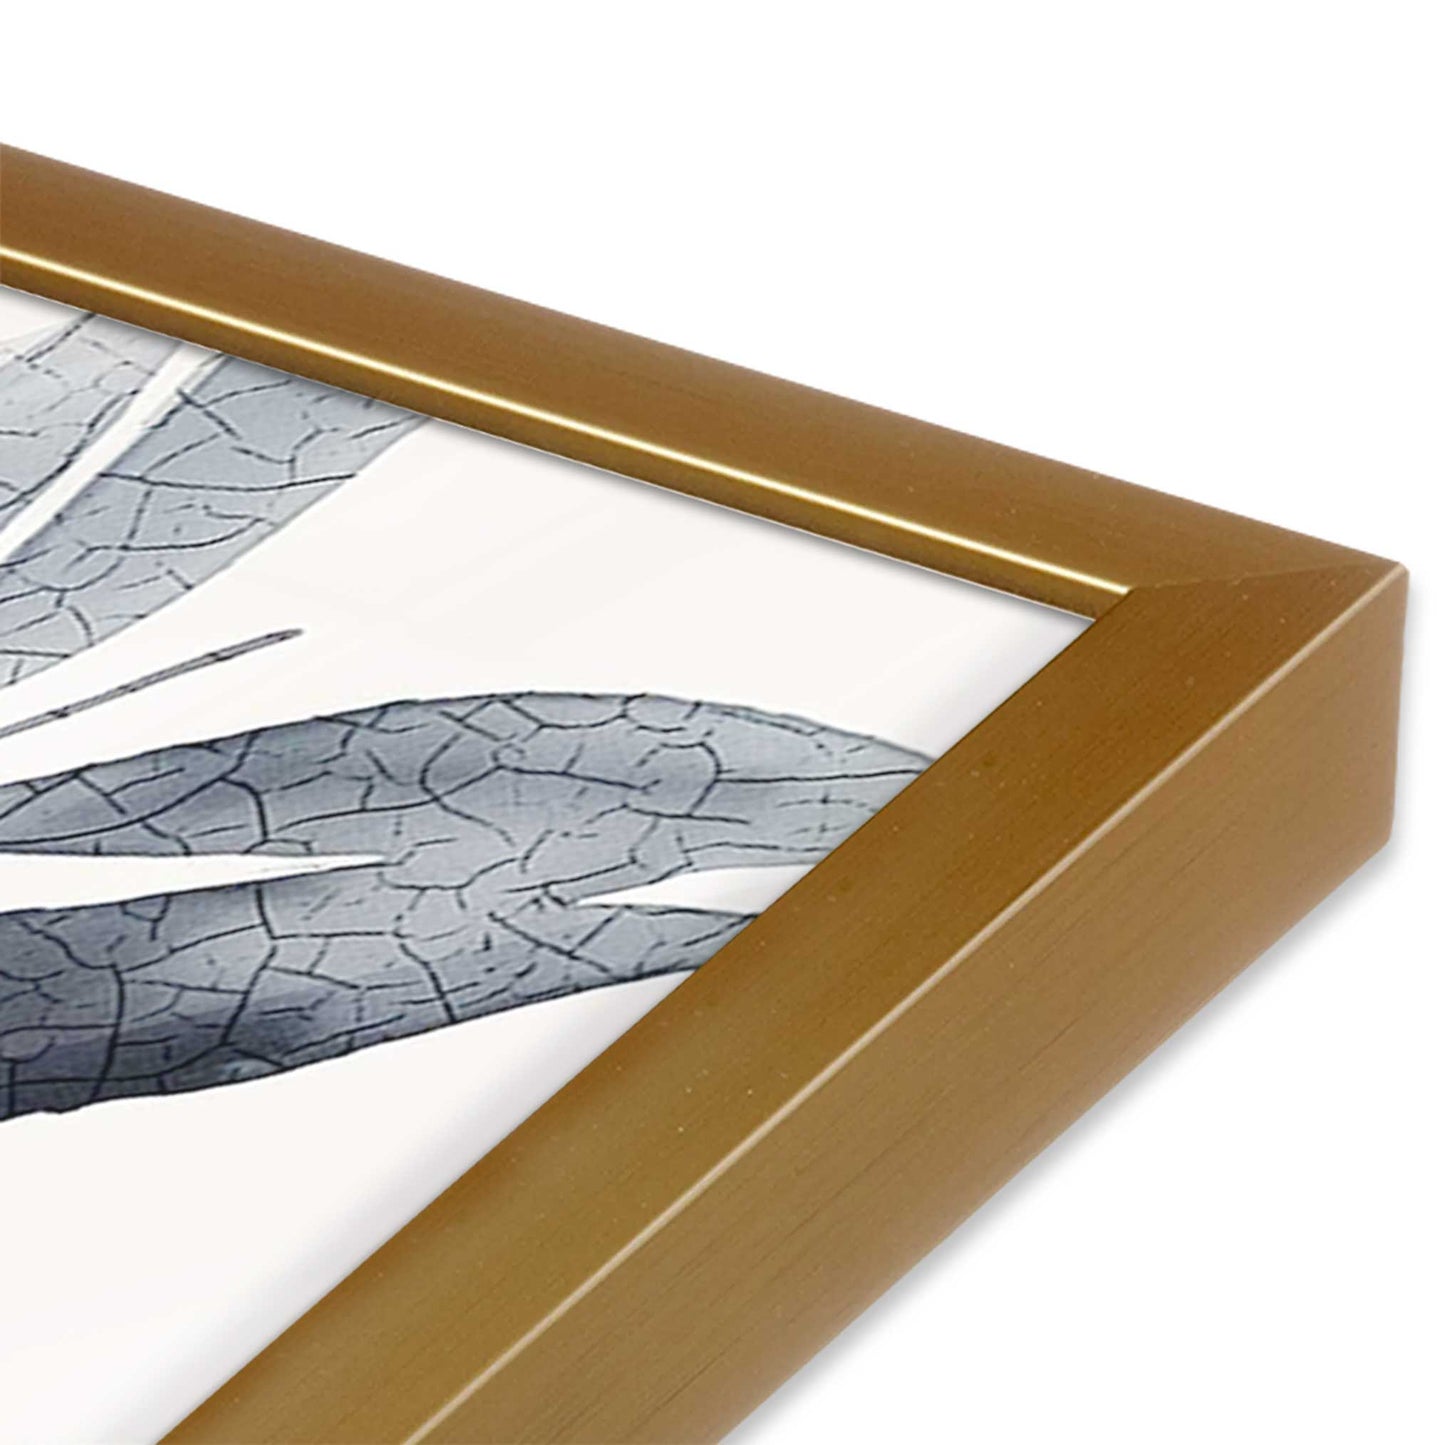 [Color:Polished Gold], Picture of art in a Polished Gold frame of the corner